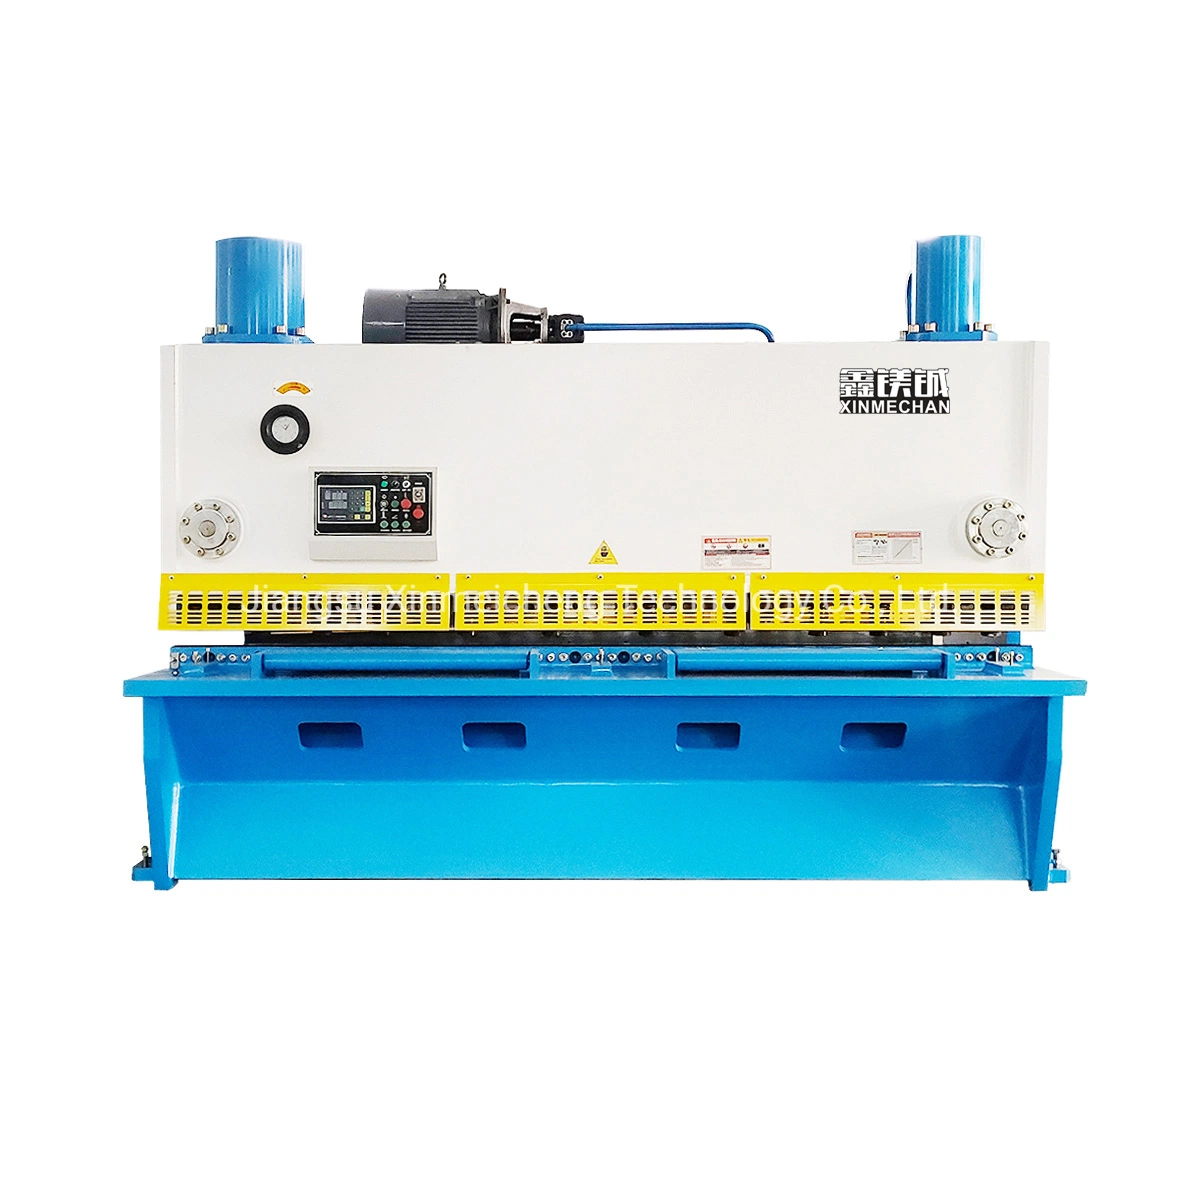 4 18mm Hydraulic Shearing Machine with E21s Nc Control for Sheet Metal Plate Steel Stainless Working Max. Cutting Width (mm) 3200